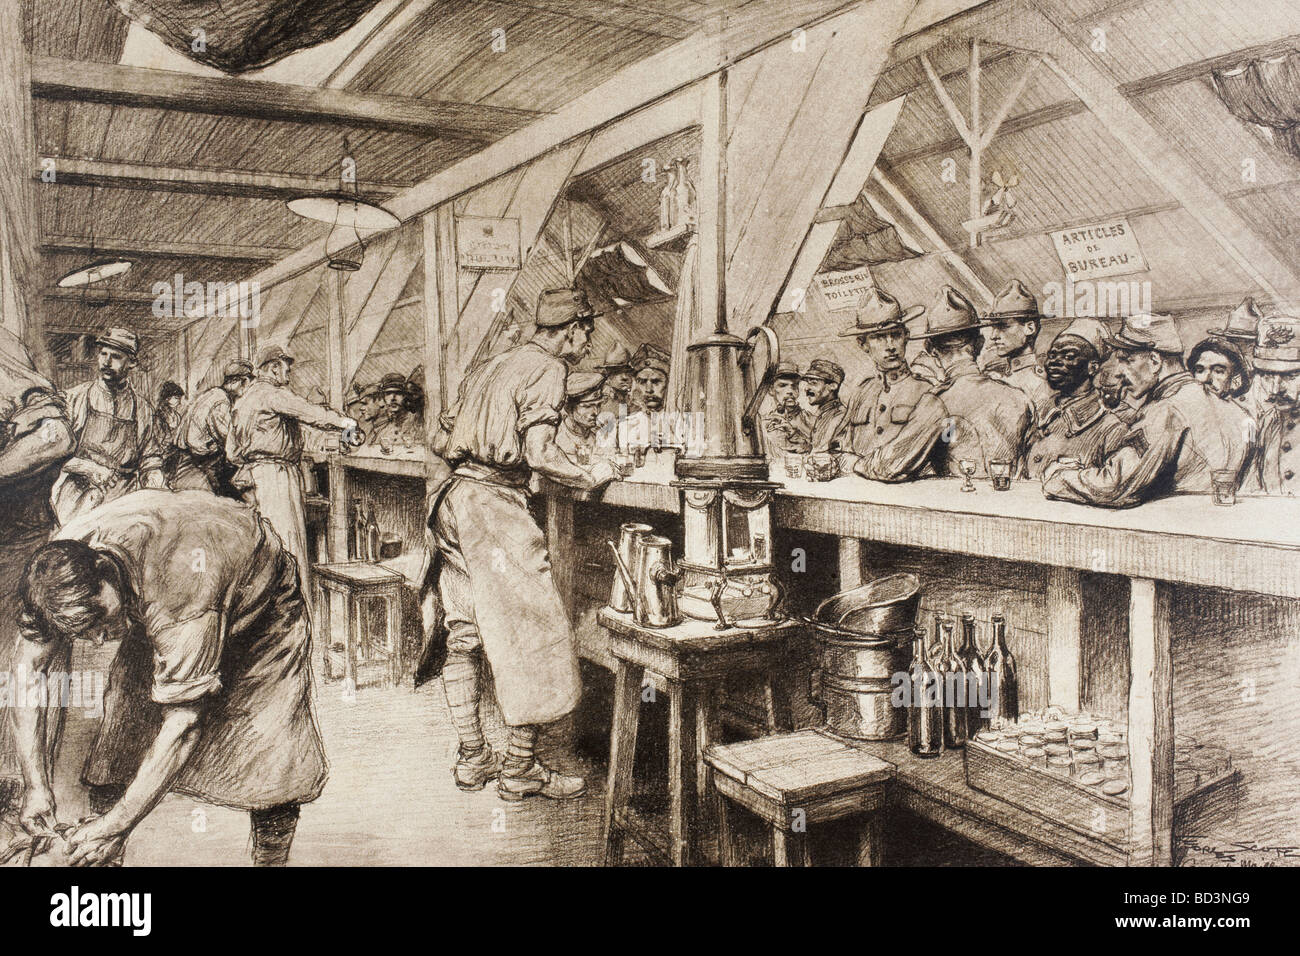 An Allied soldiers canteen in a military camp in France during the First World War. Stock Photo